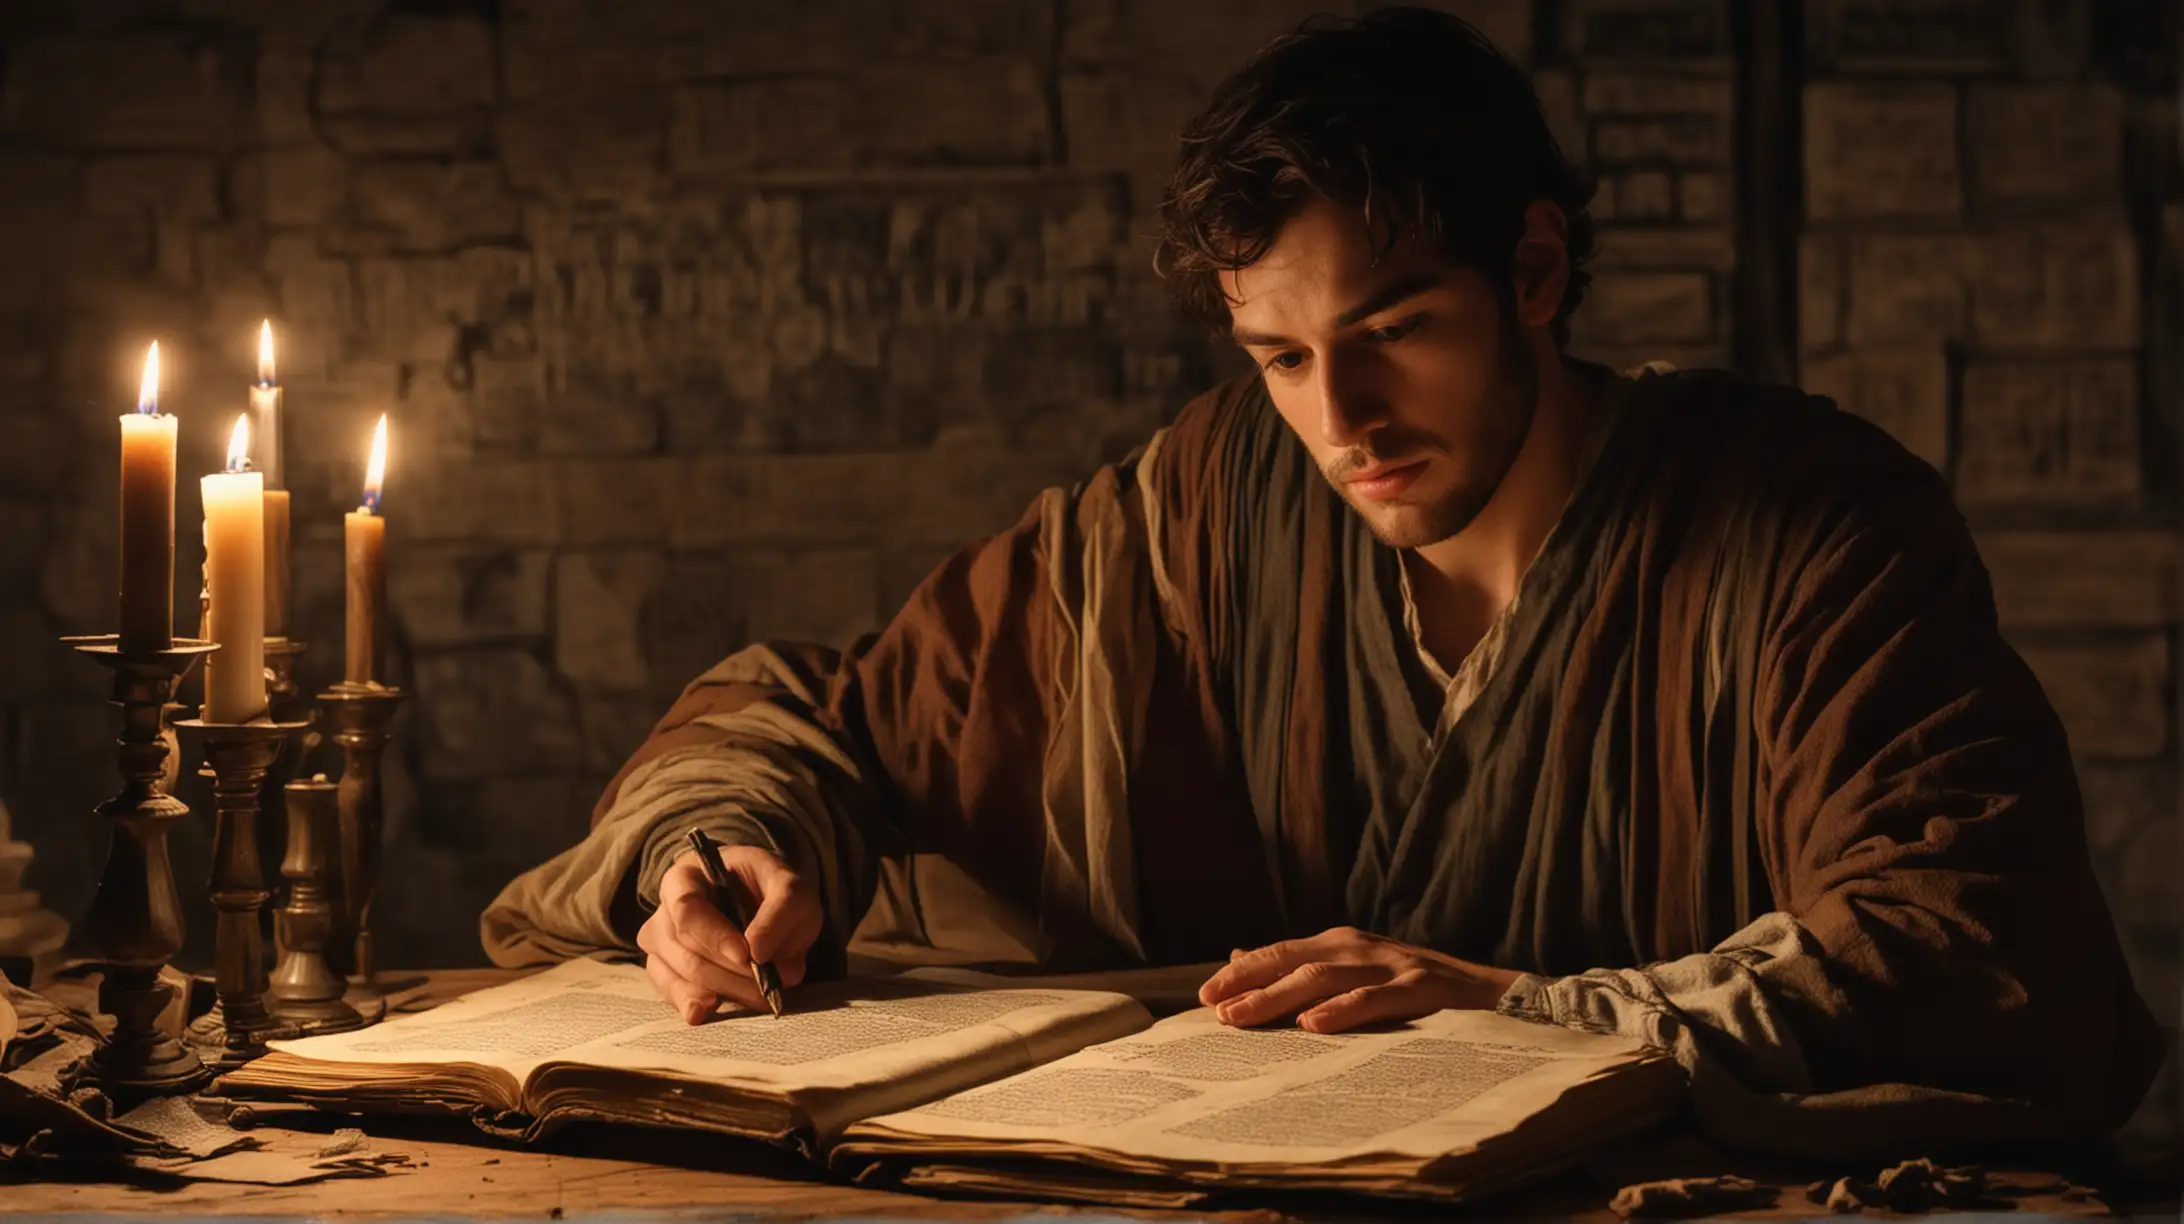 Ezra Writing Ancient Manuscripts by Candlelight